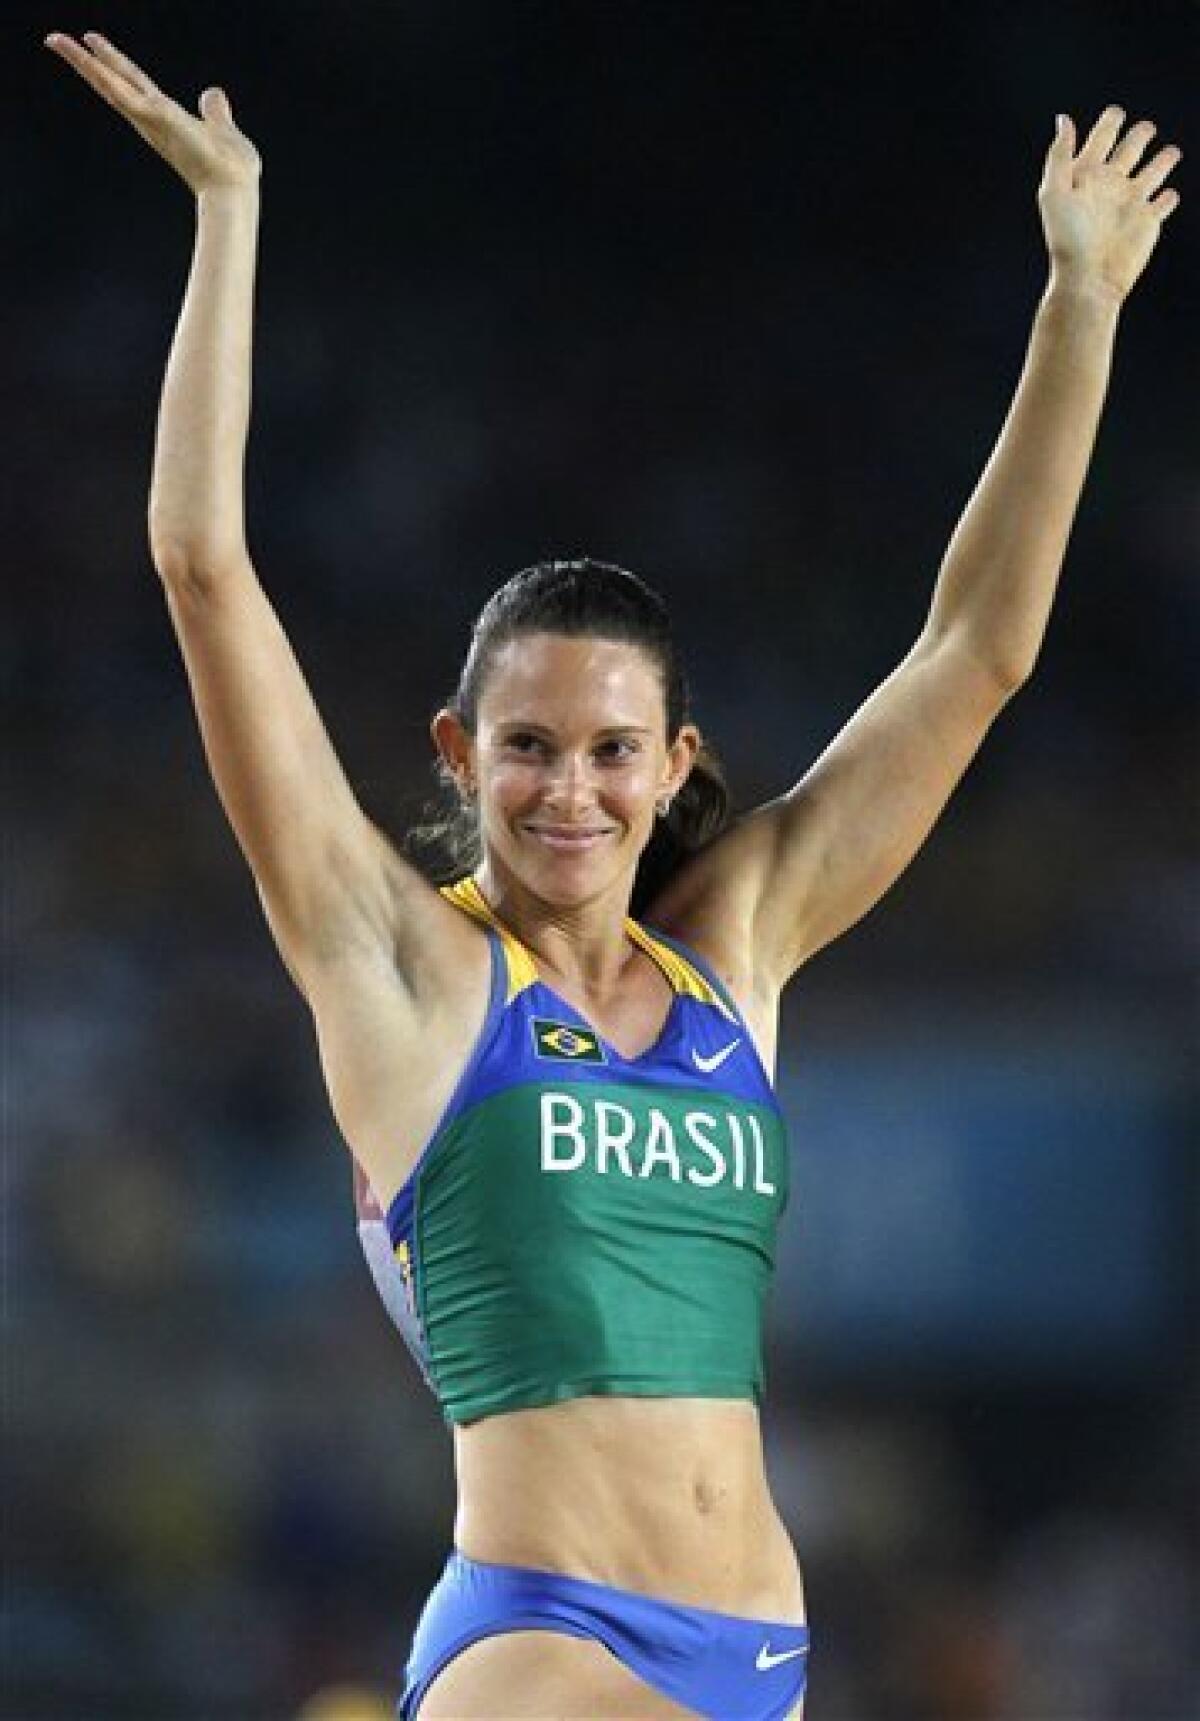 Brazil's Fabiana Murer reacts after clearing a bar in the Women's Pole Vault final at the World Athletics Championships in Daegu, South Korea, Tuesday, Aug. 30, 2011. (AP Photo/Kin Cheung)